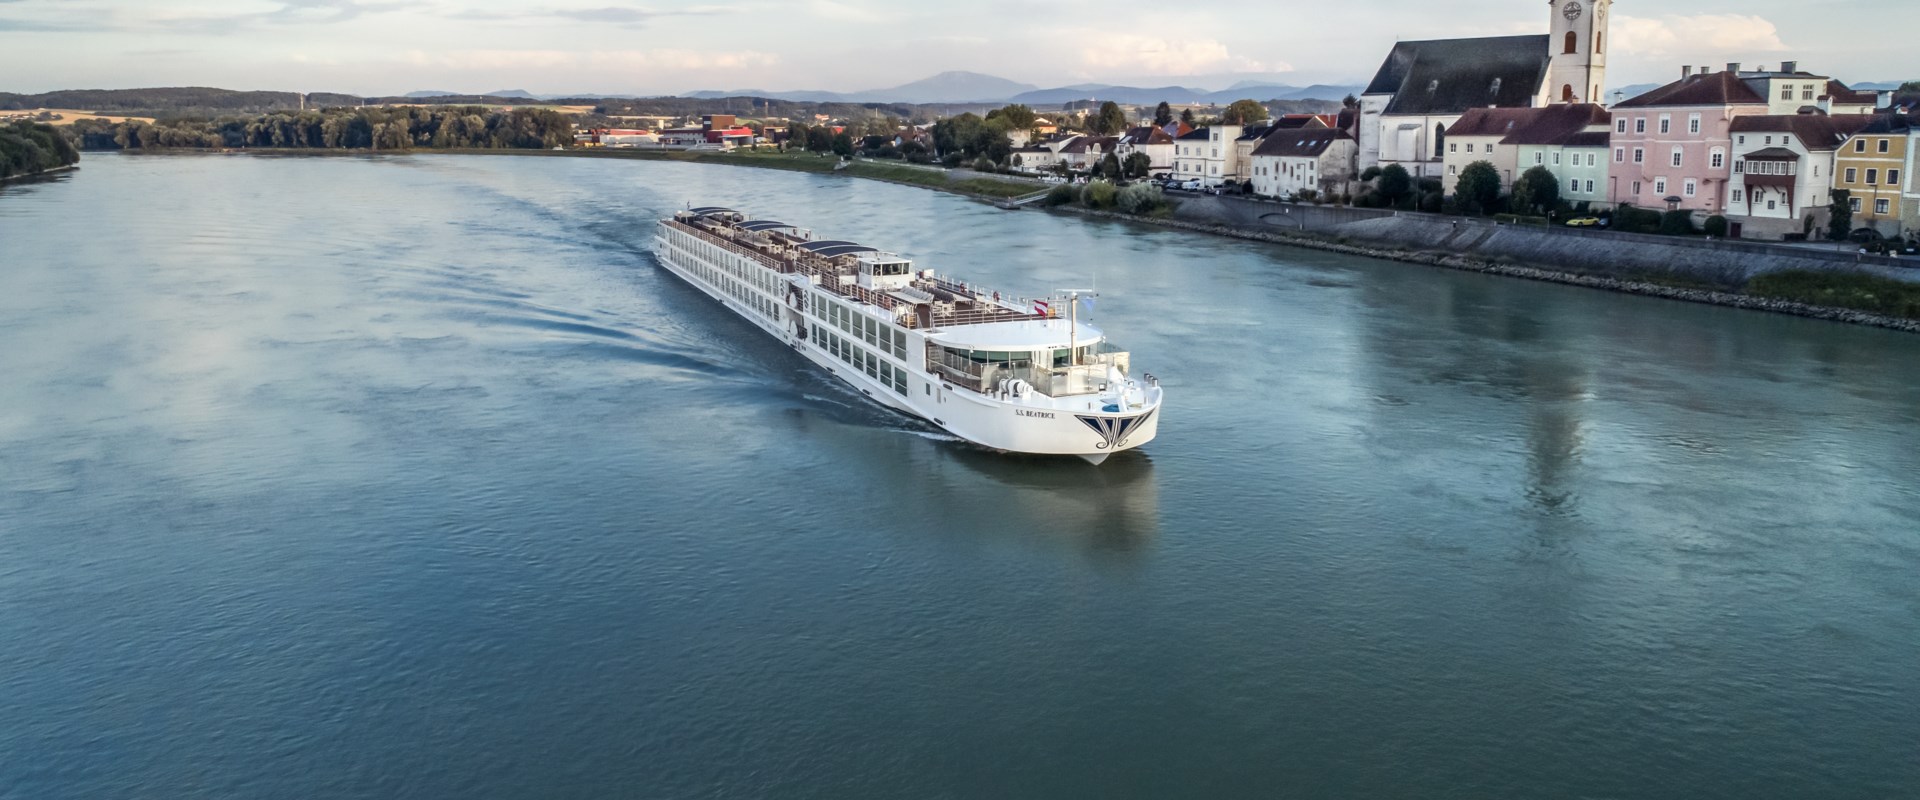 NEW  CRUISE BACK INTO TRAVEL ON THE RIVERS